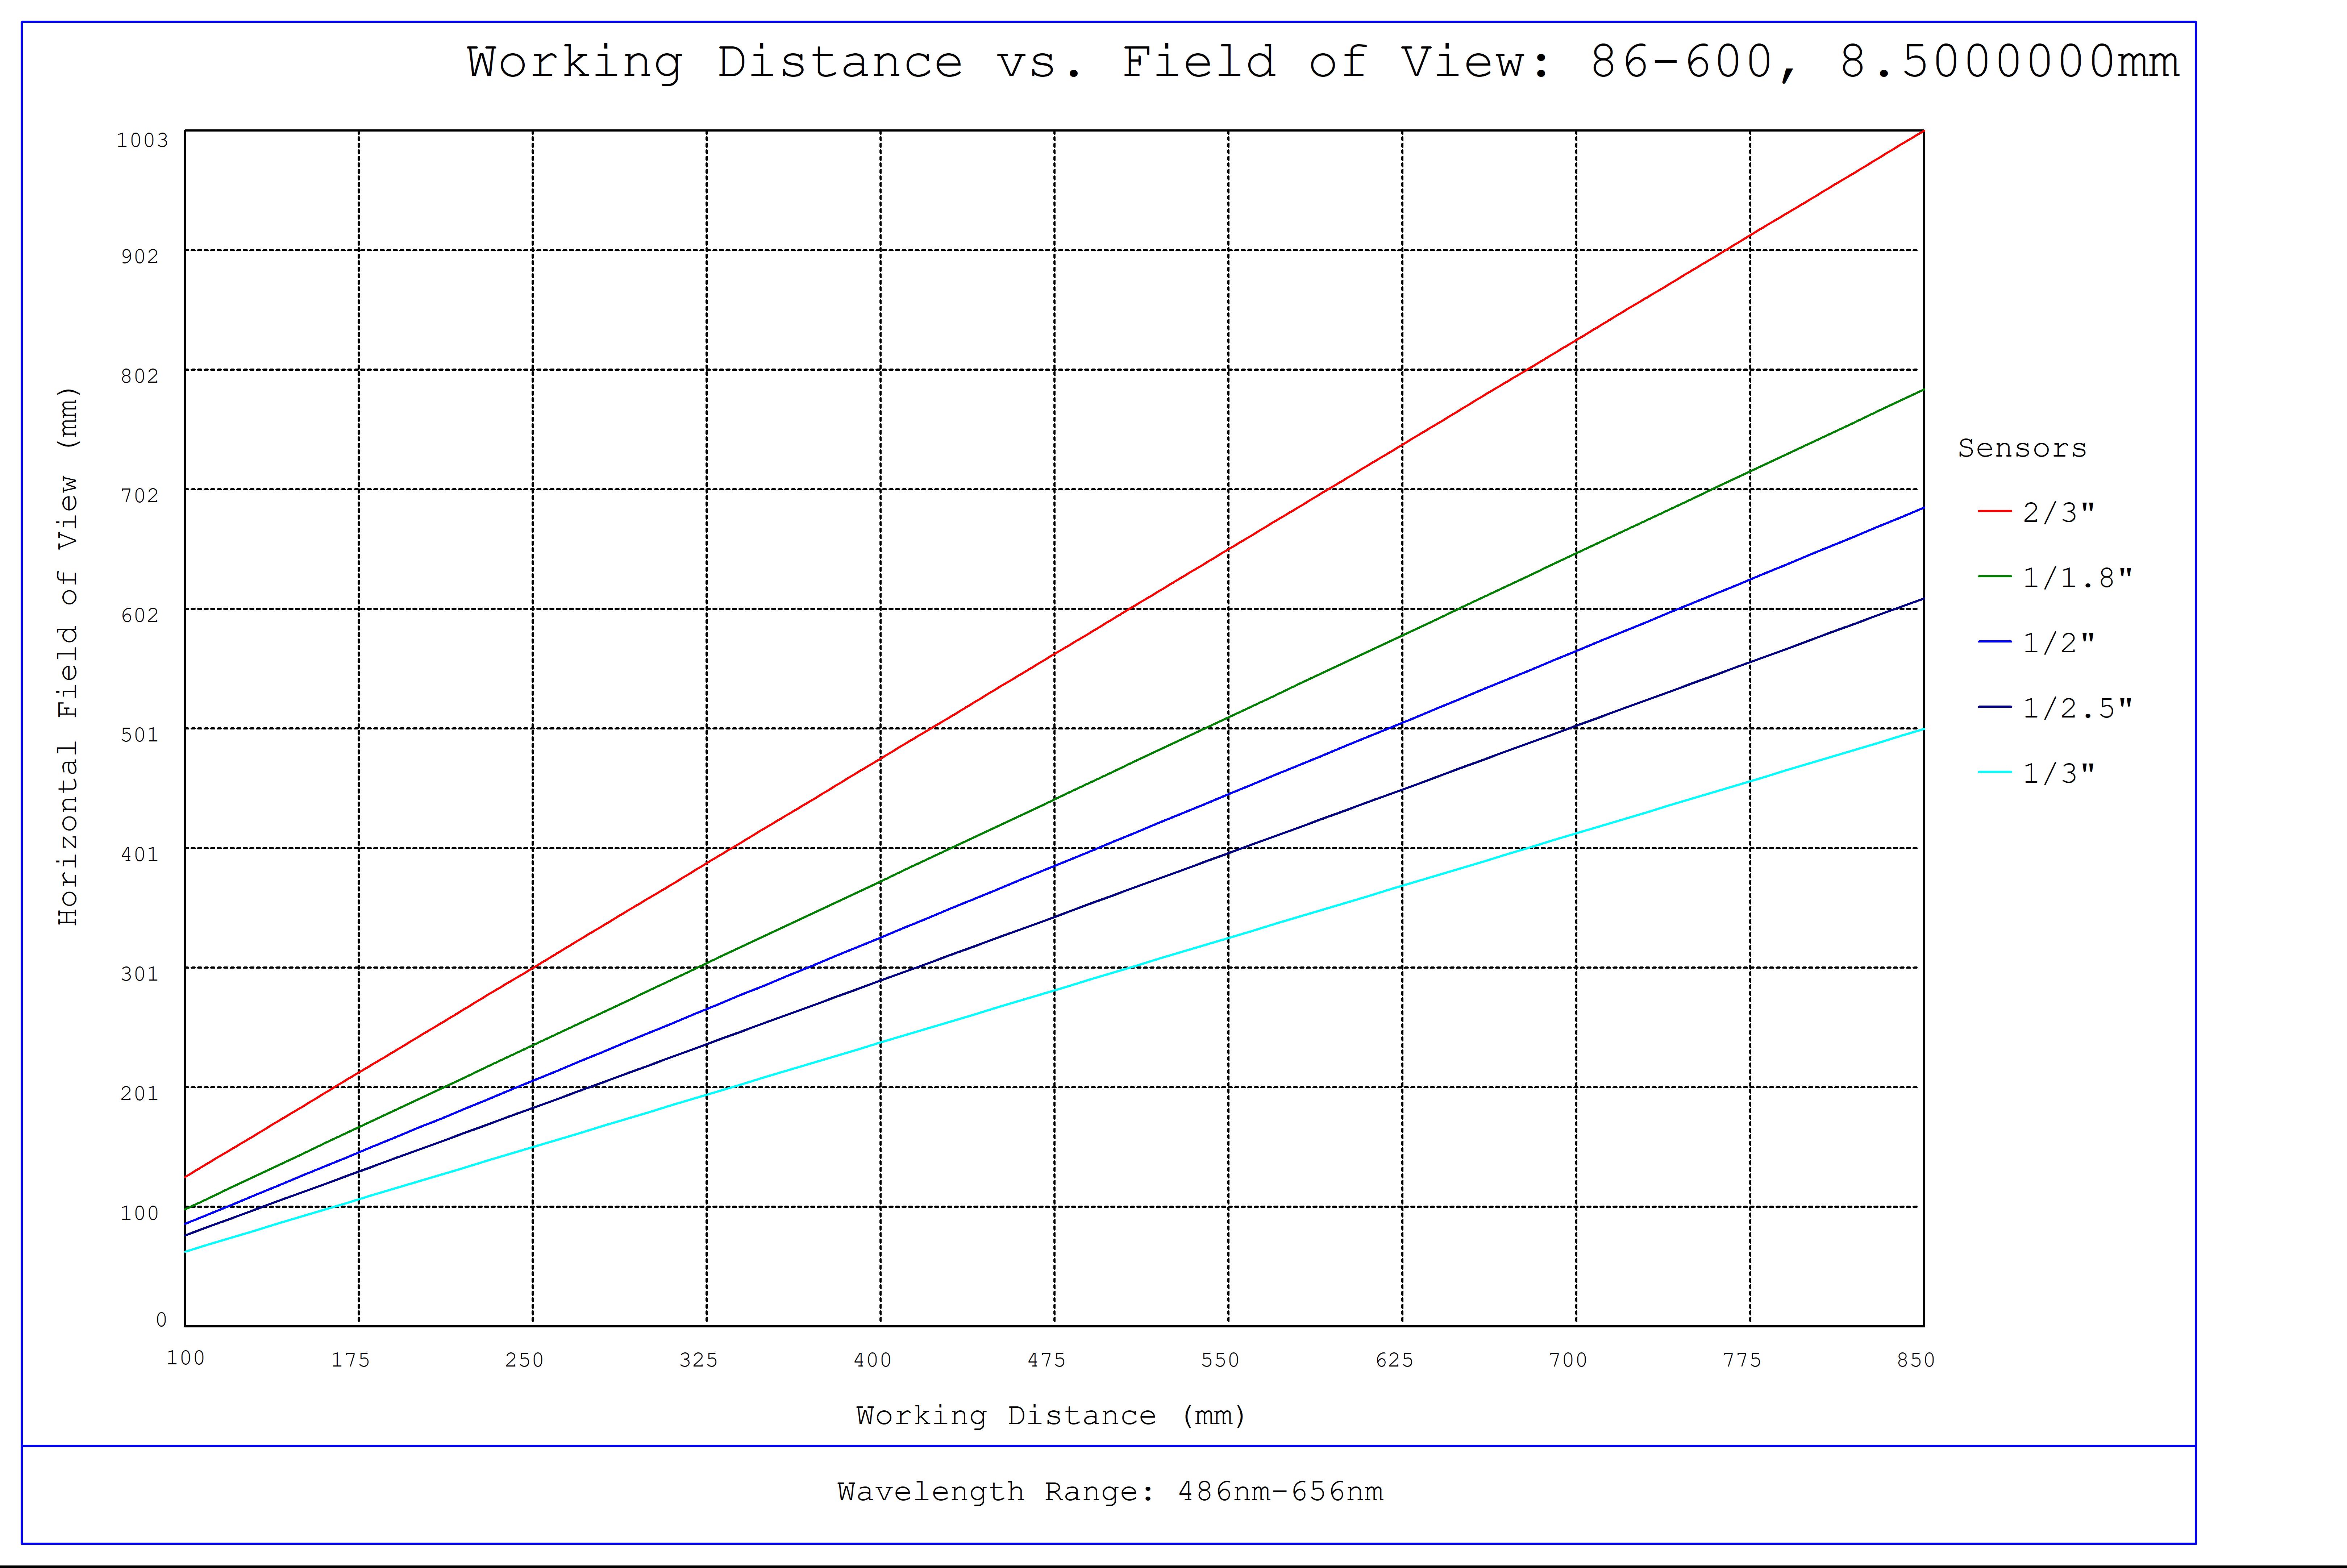 #86-600, 8.5mm, f/1.8 Ci Series Fixed Focal Length Lens, Working Distance versus Field of View Plot